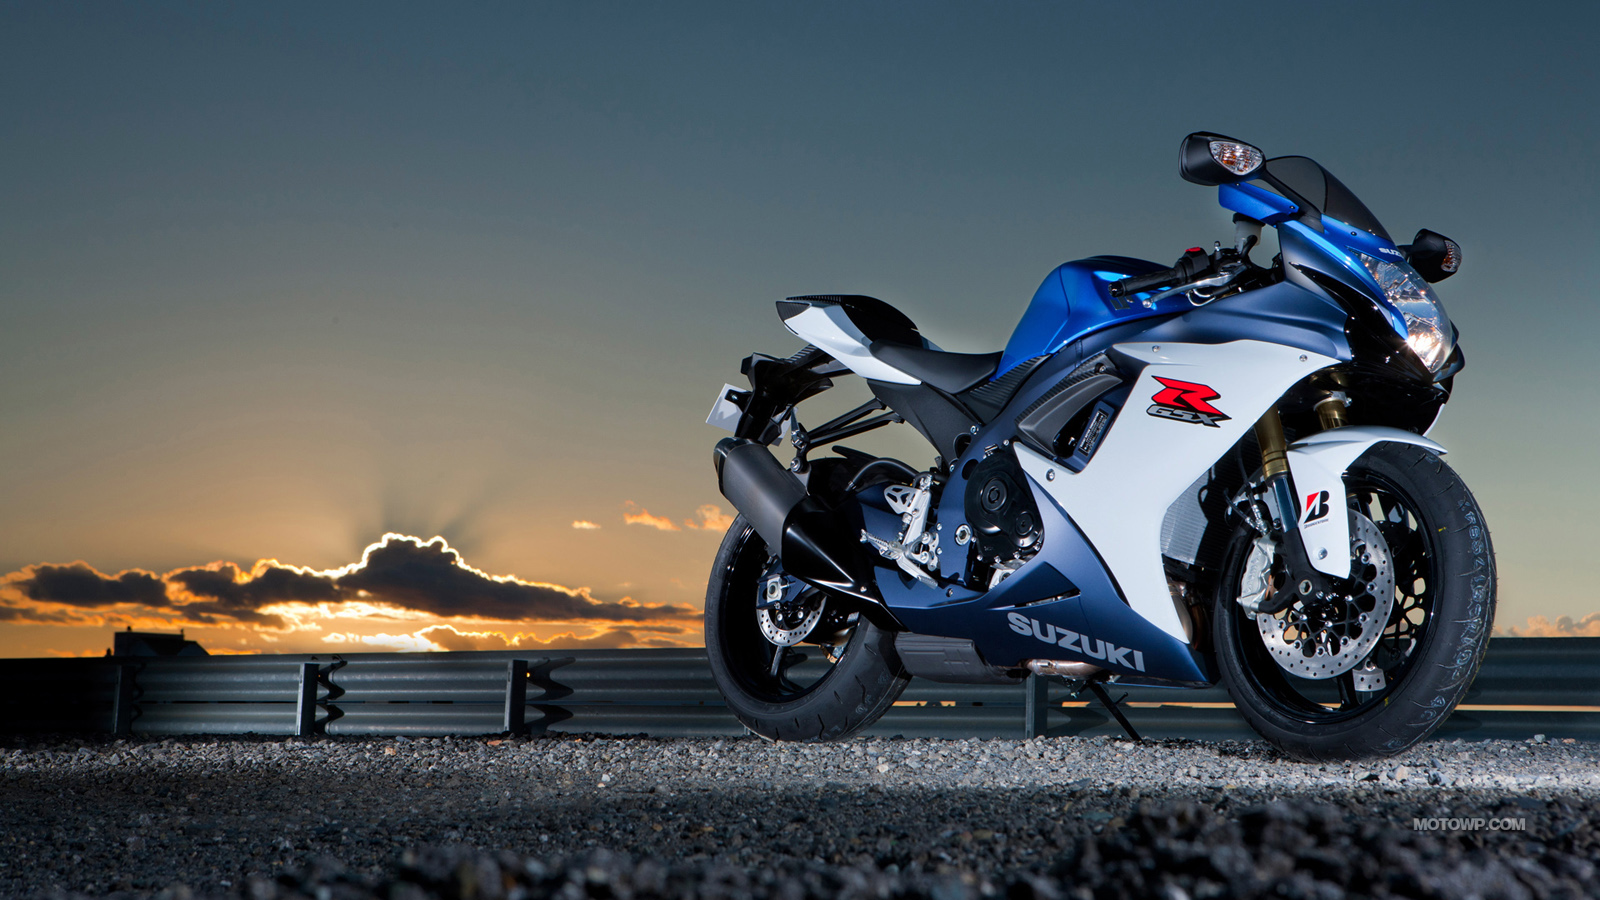 Suzuki 750 Gsxr Motorcycle Wallpapers Hd High Definitions Backgrounds